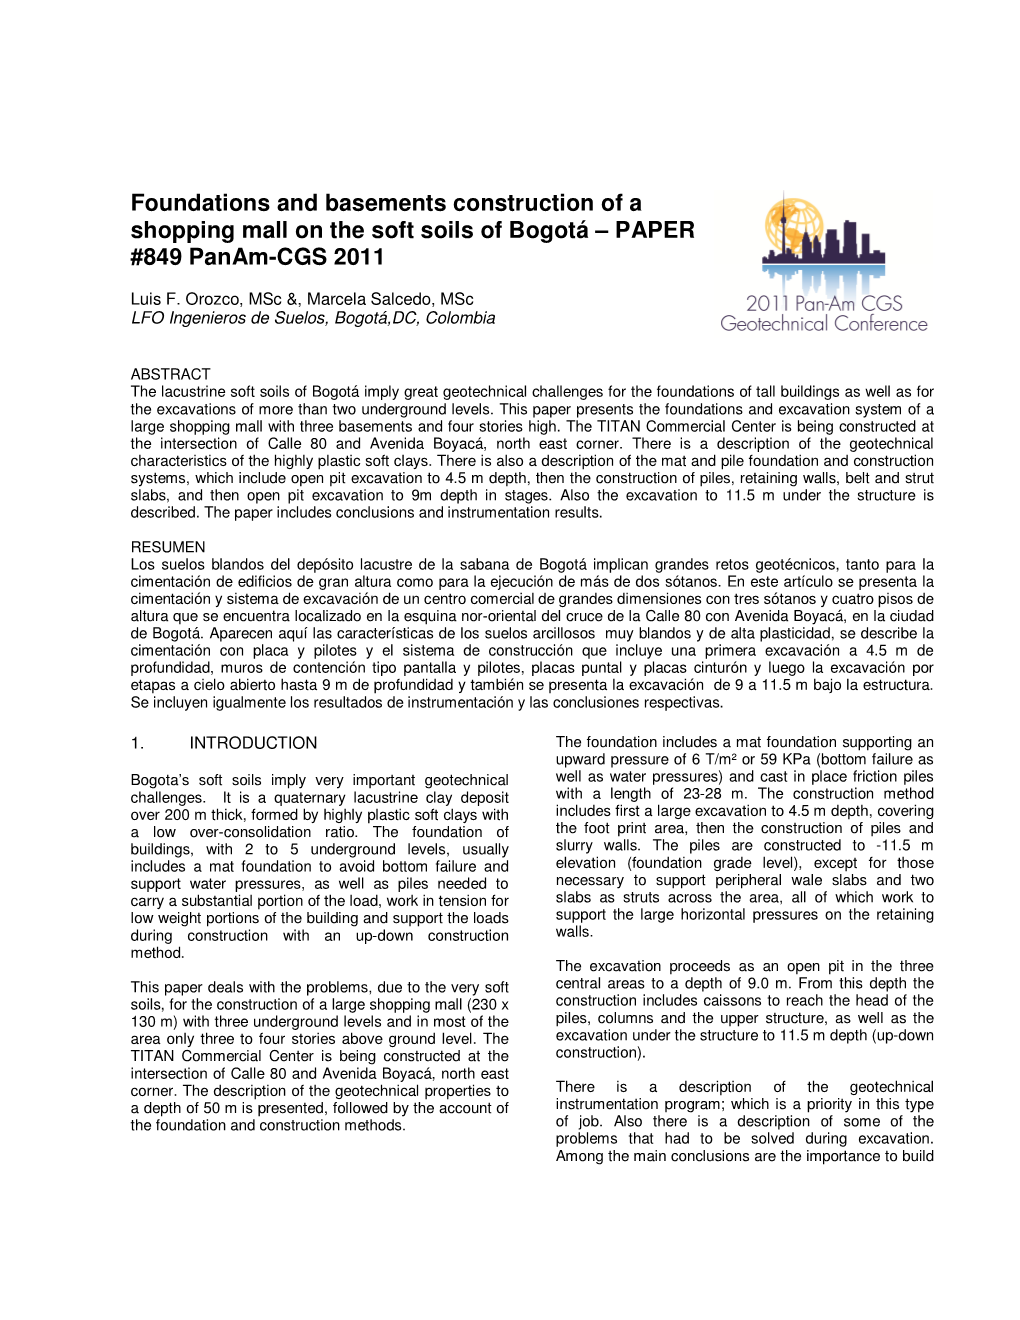 Foundations and Basements Construction of a Shopping Mall on the Soft Soils of Bogotá – PAPER #849 Panam-CGS 2011